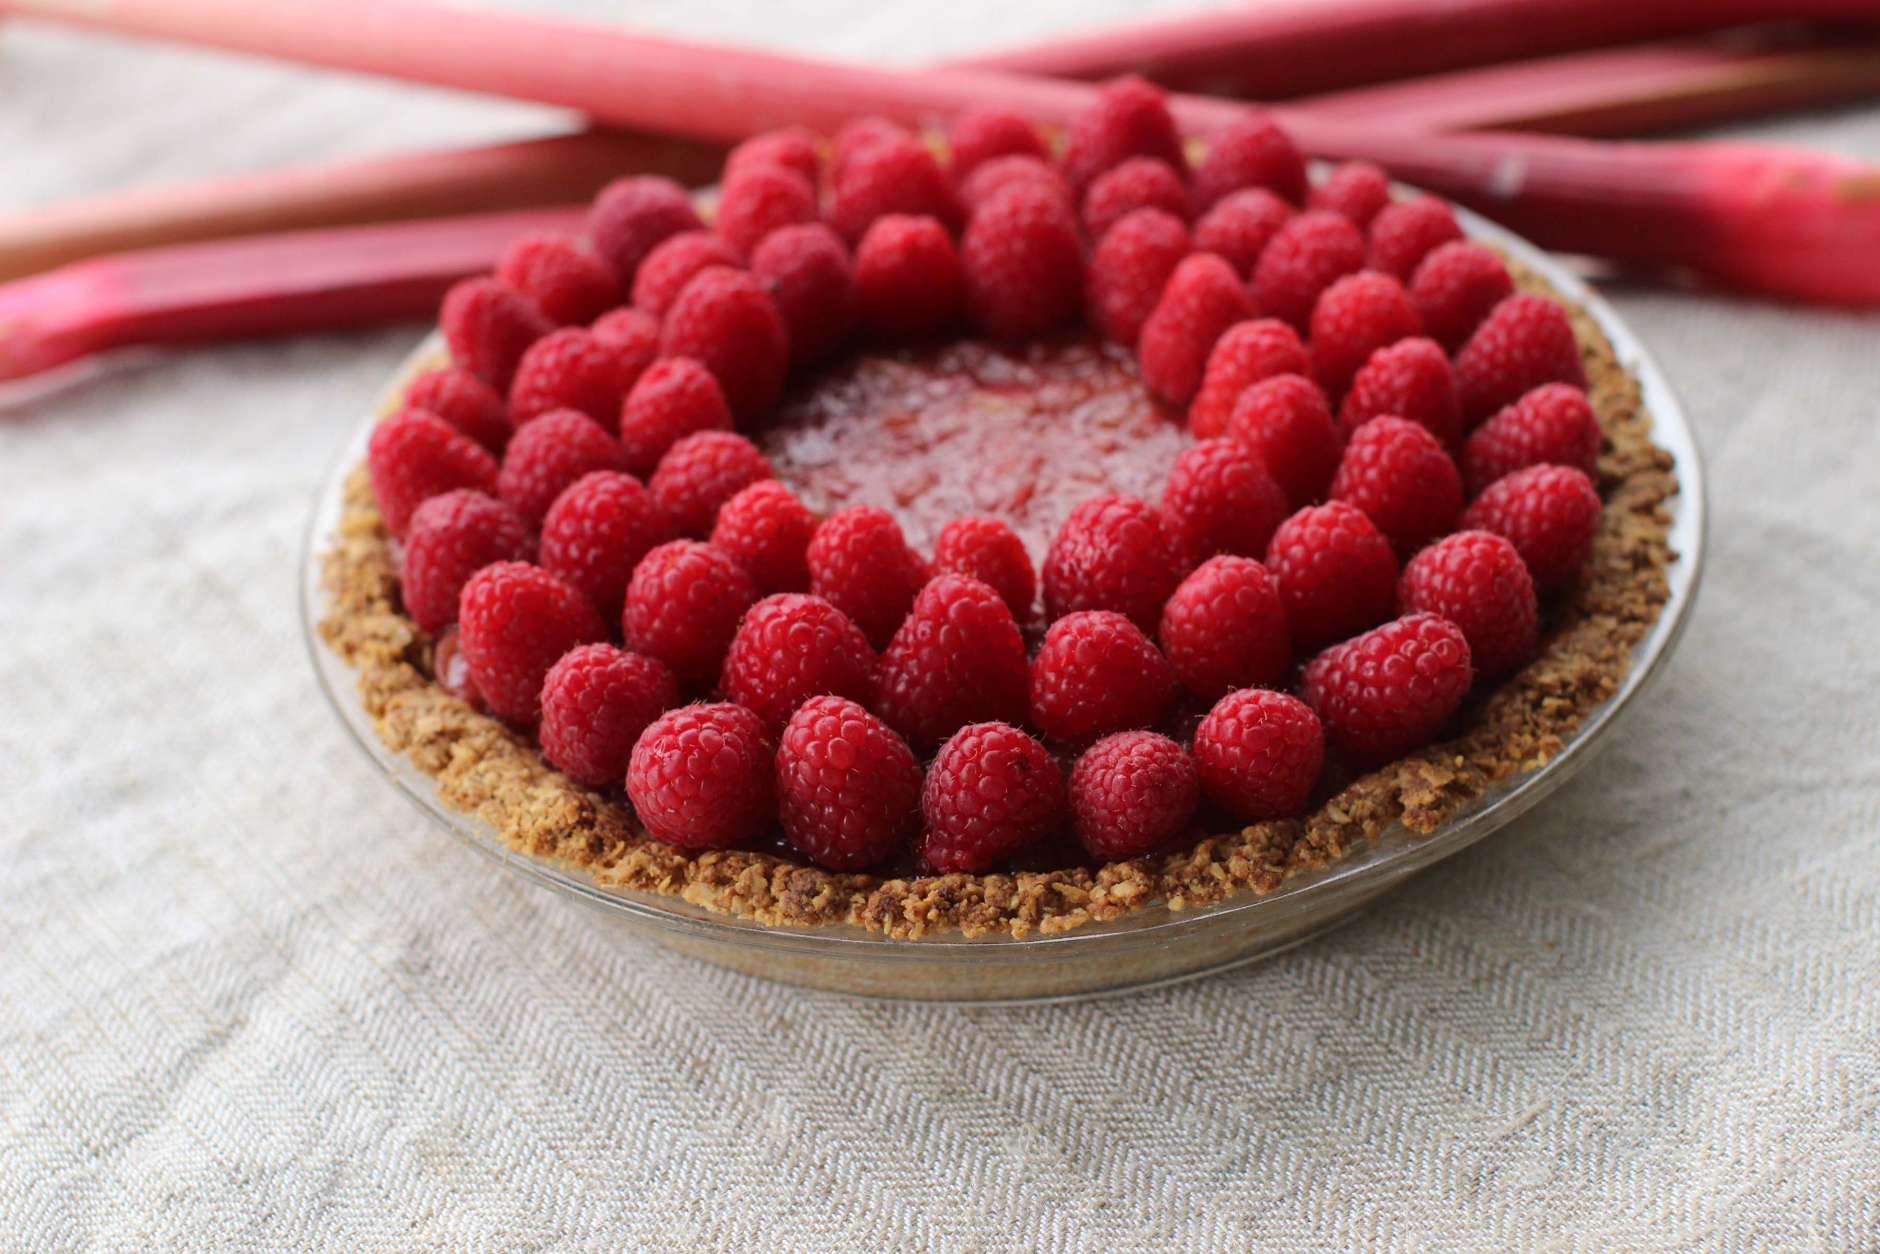 This June 8, 2015 photo shows raspberry rhubarb cream pie with oatmeal crust in Concord, N.H. (AP Photo/Matthew Mead)